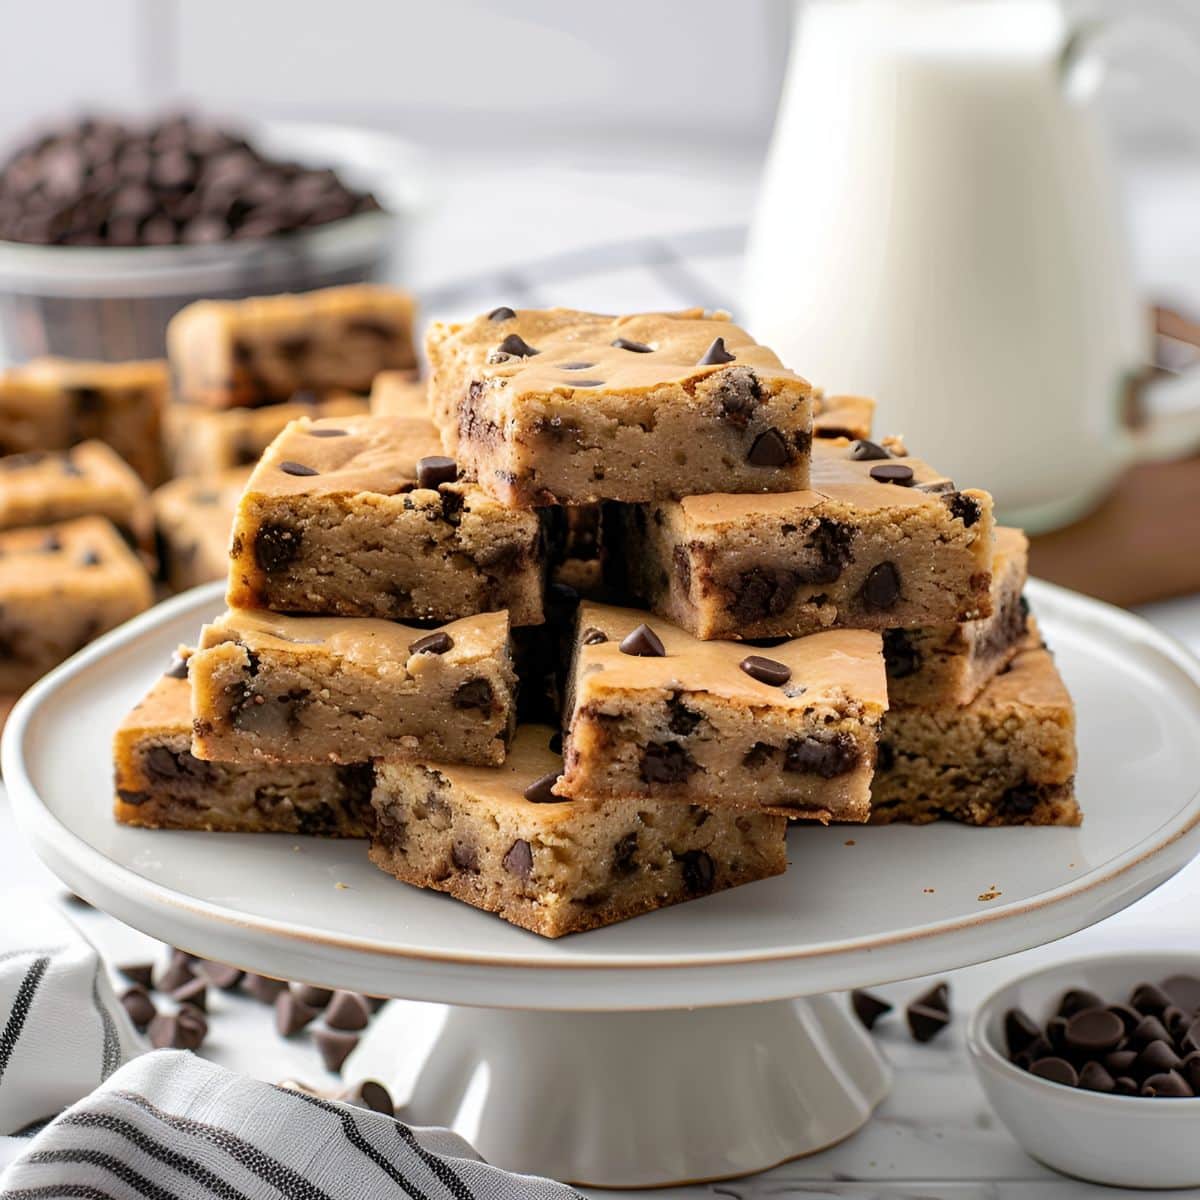 Chocolate Chip Blondie Squares Piled on a Cake Plate with More Chocolate Chip Blondies, Milk, and Chocolate Chips in the Background